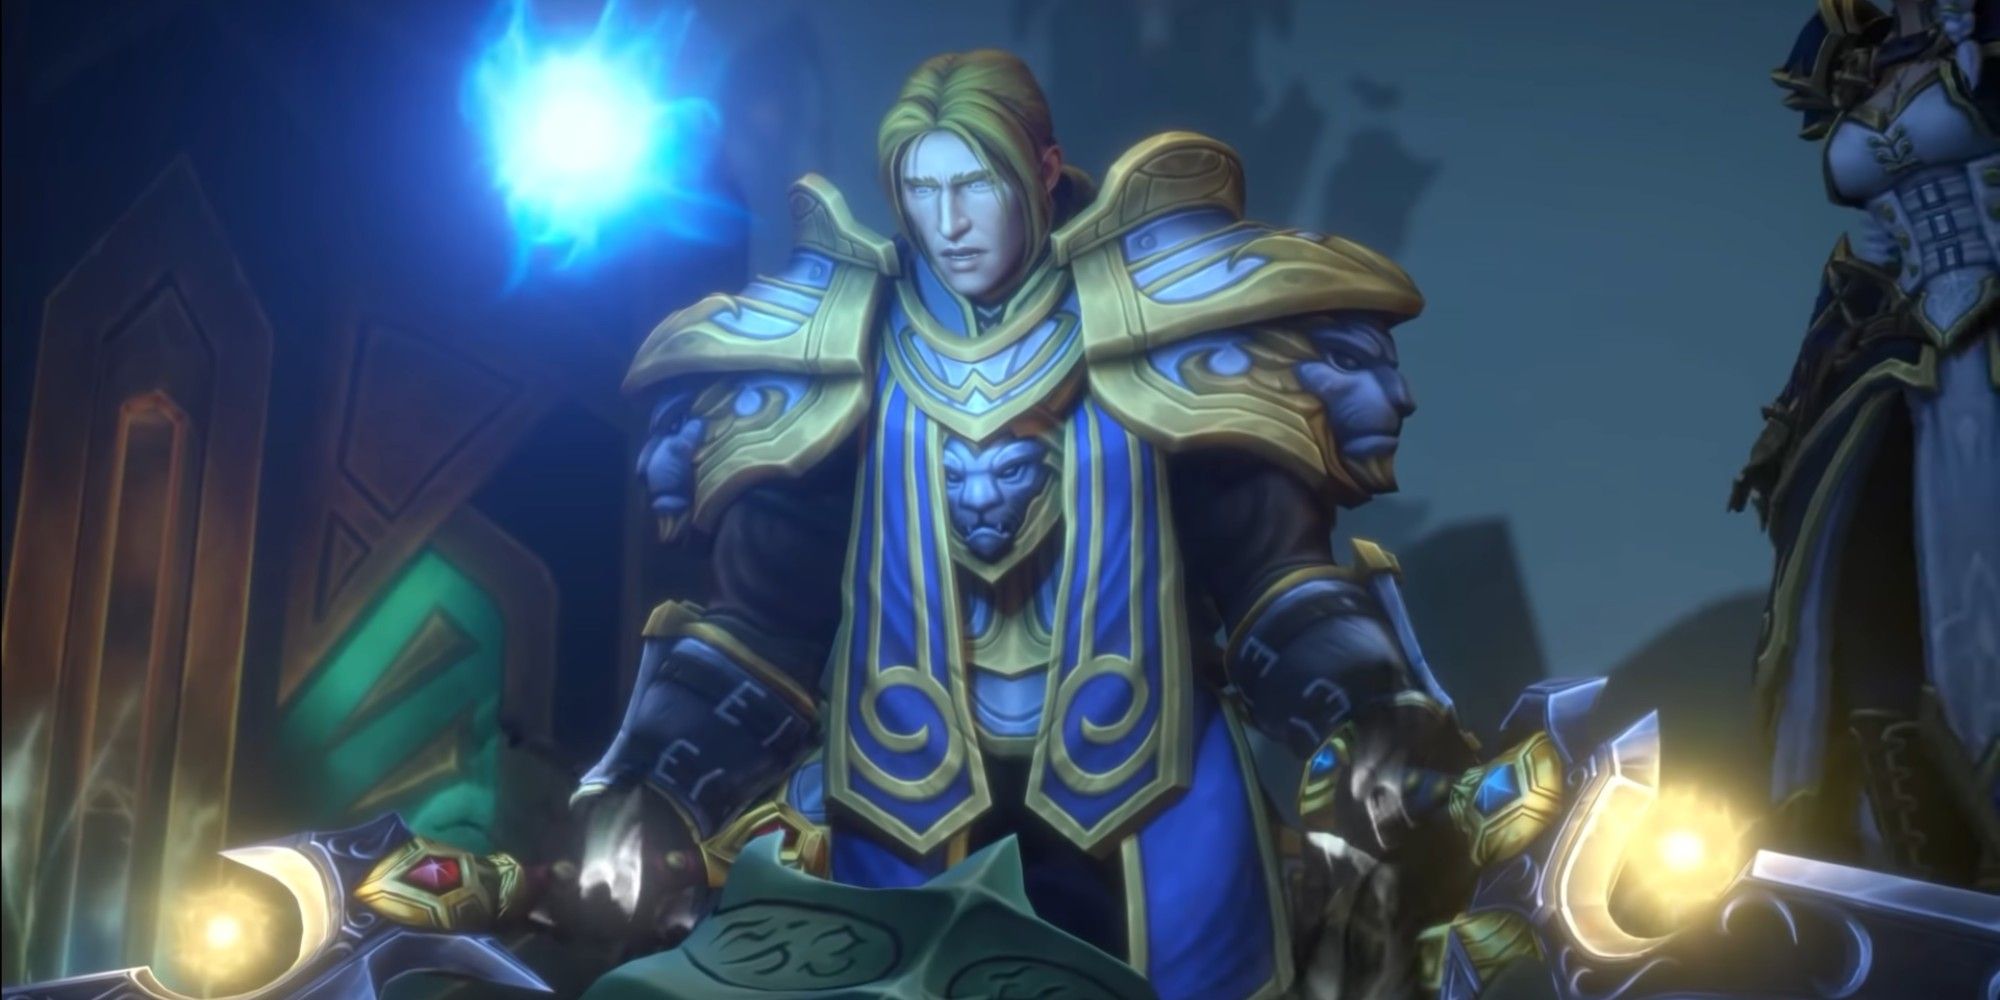 World of Warcraft Anduin being free of the Jailers control with Jaine in the background